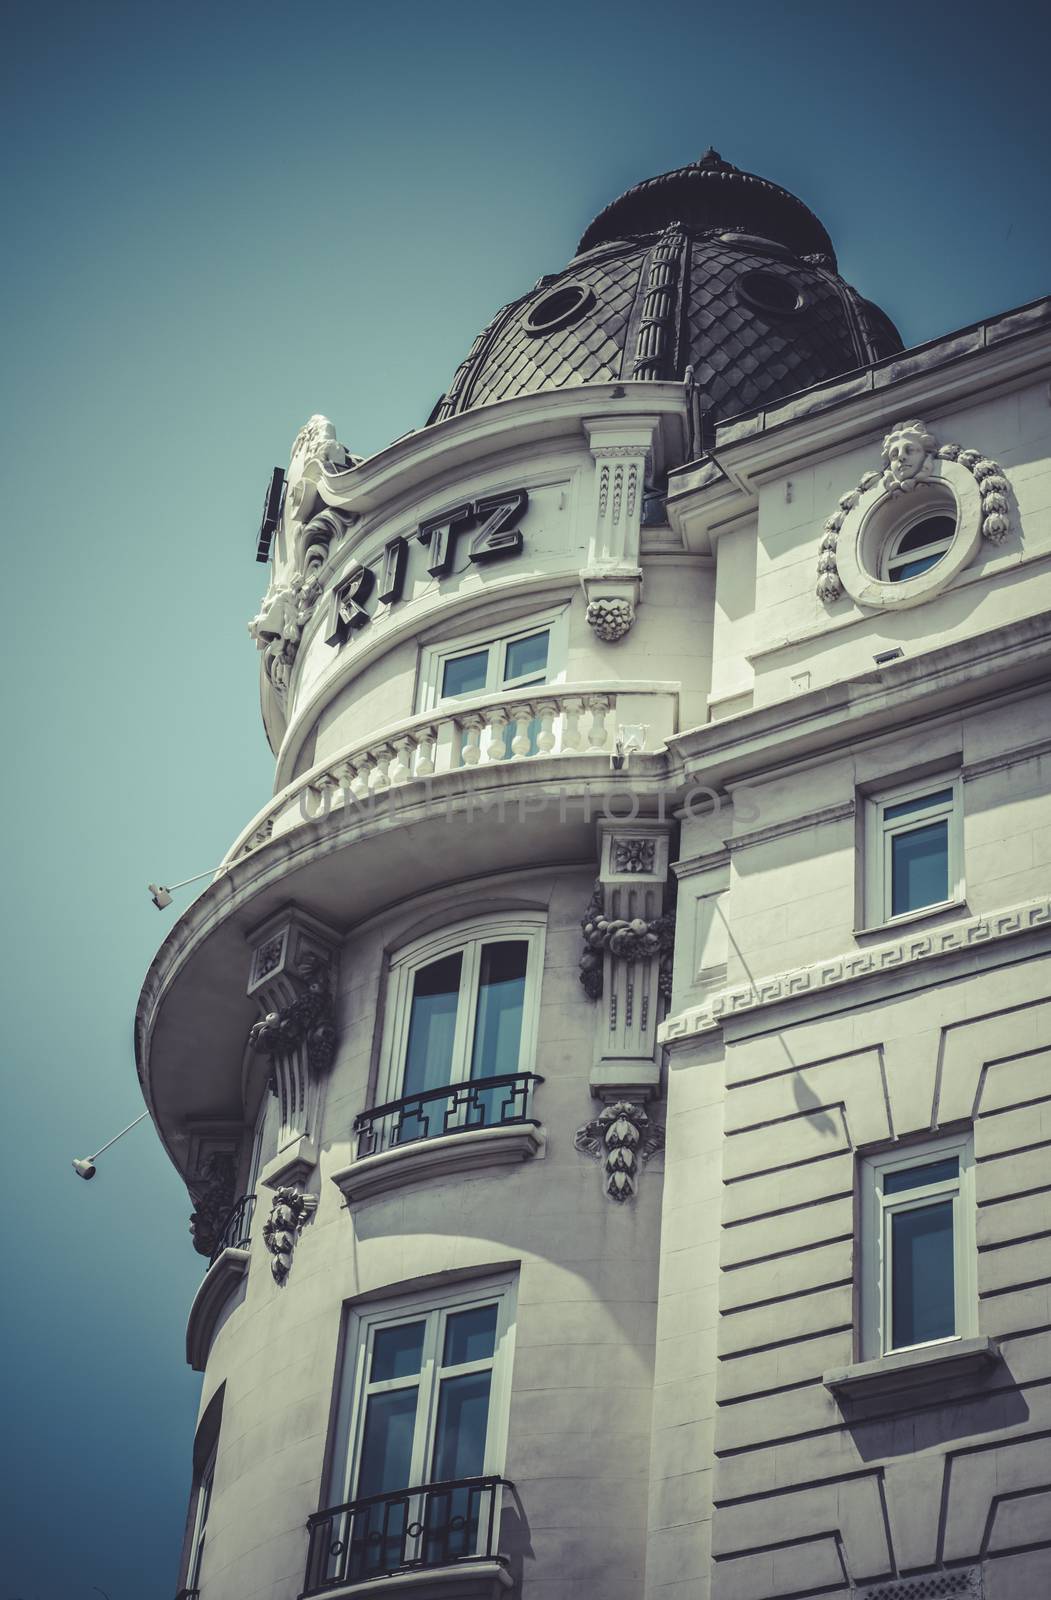 Hotel, Image of the city of Madrid, its characteristic architect by FernandoCortes